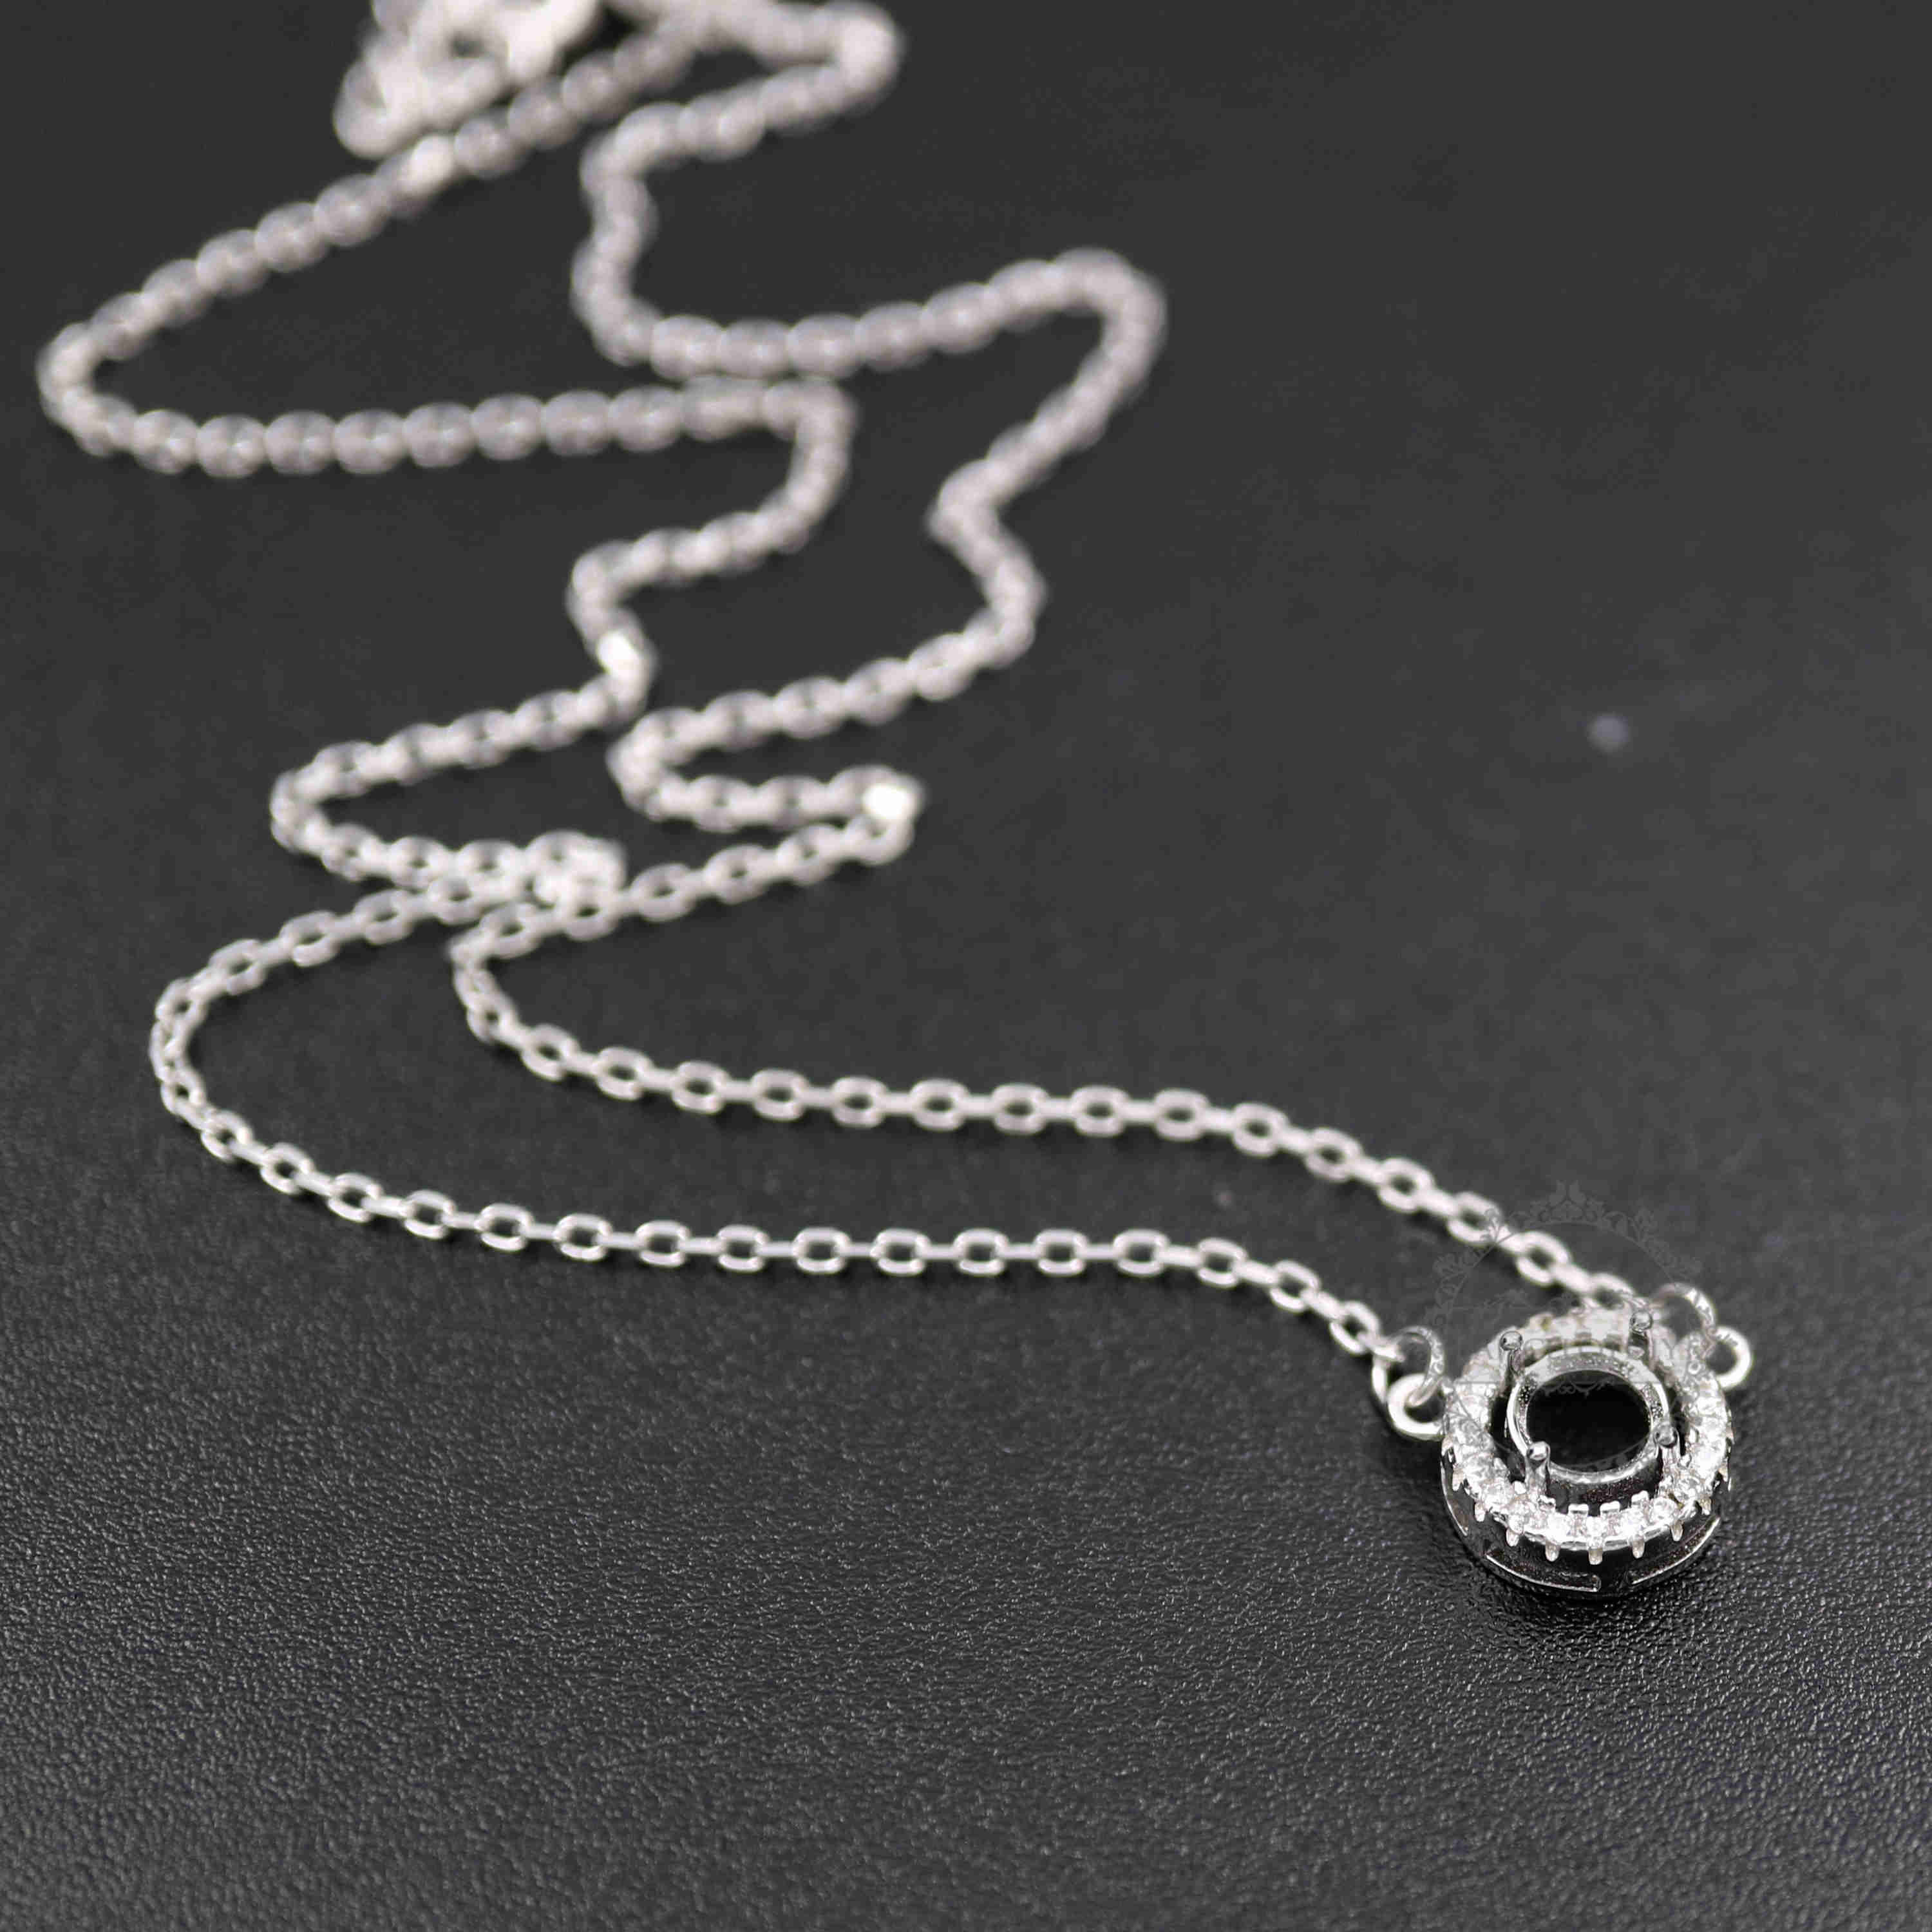 1Pcs 5-8MM Gems Cz Stone Round Prong Bezel Settings Solid 925 Sterling Silver DIY Pendant Charm Tray With 15'' Necklace Chain 1411215 - Click Image to Close